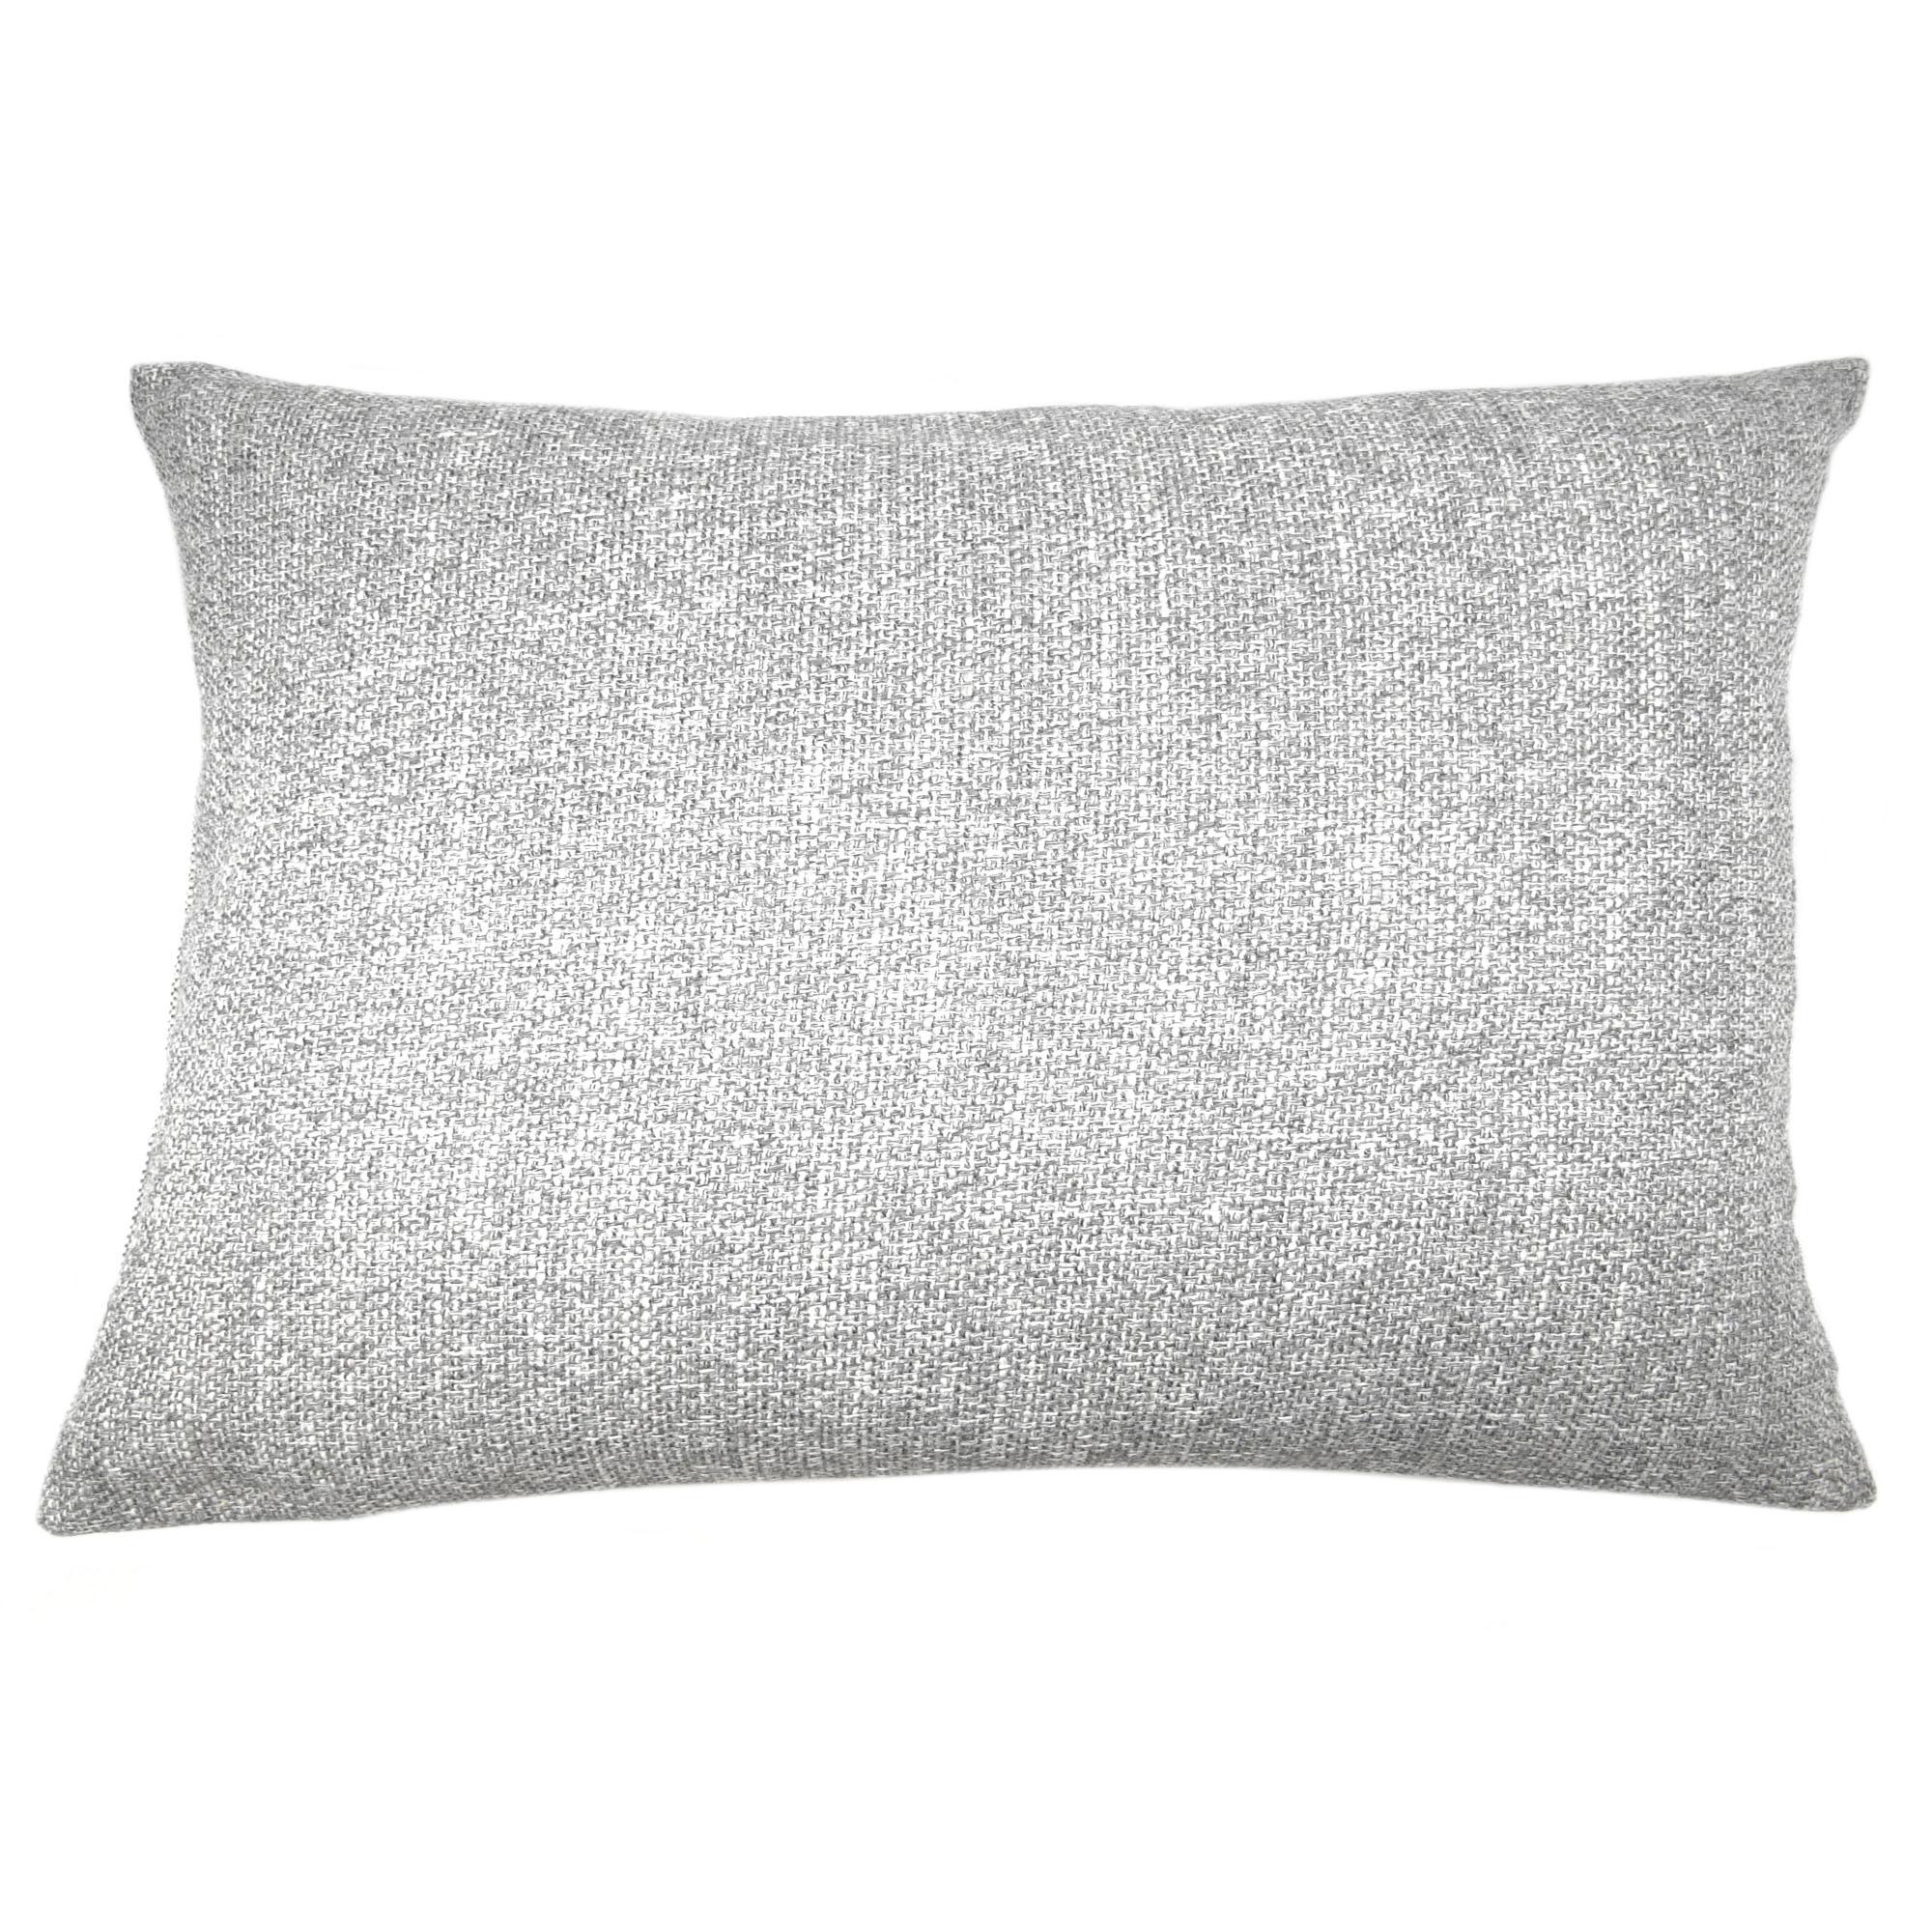 Cushion Covers | Living Room & Bedroom Cushion Covers | Dunelm